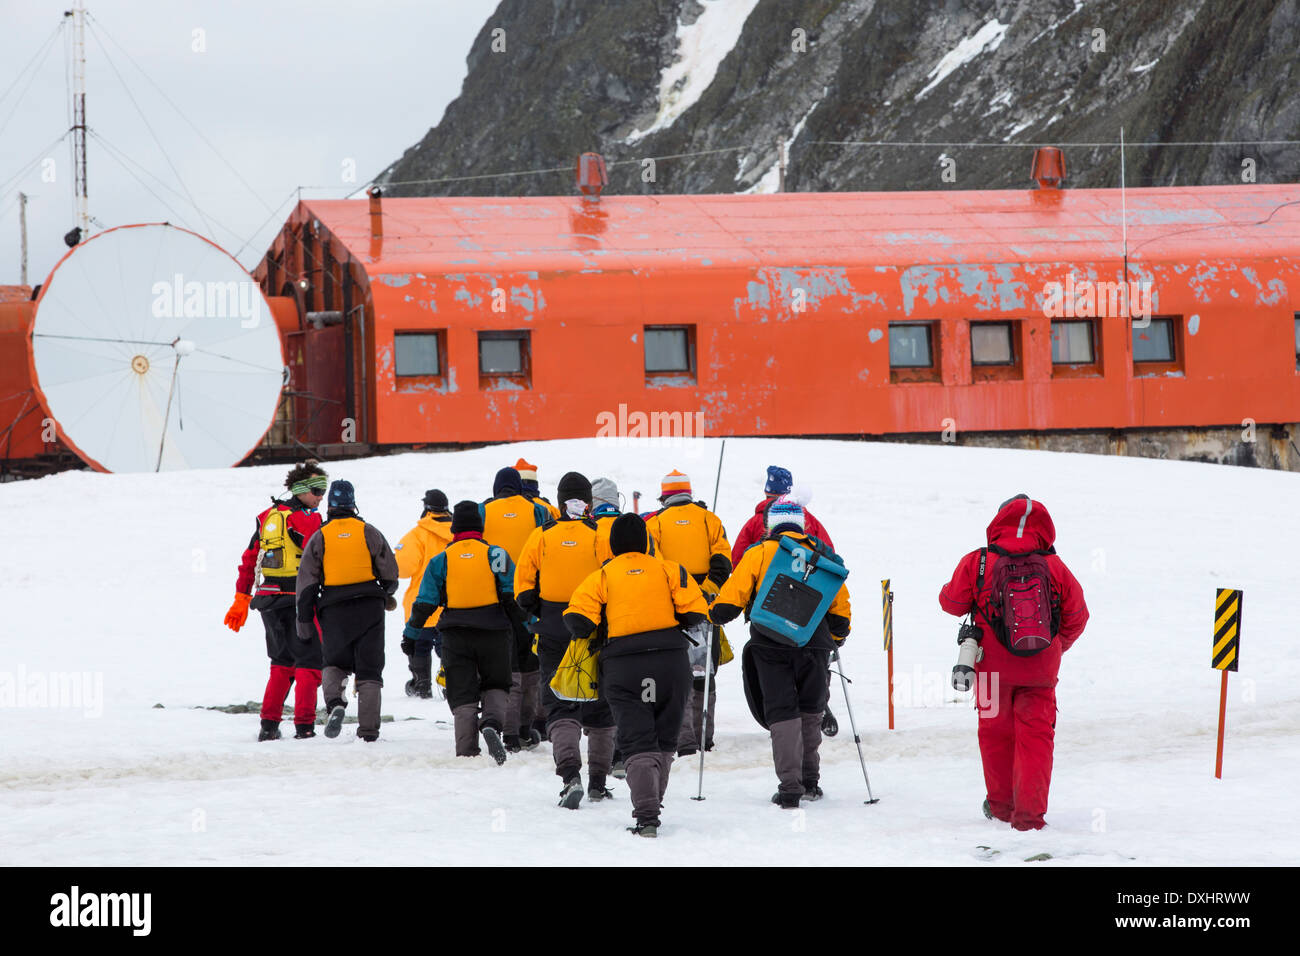 Passengers from an expedition cruise visit Base Orcadas which is an Argentine scientific station in Antarctica, Stock Photo